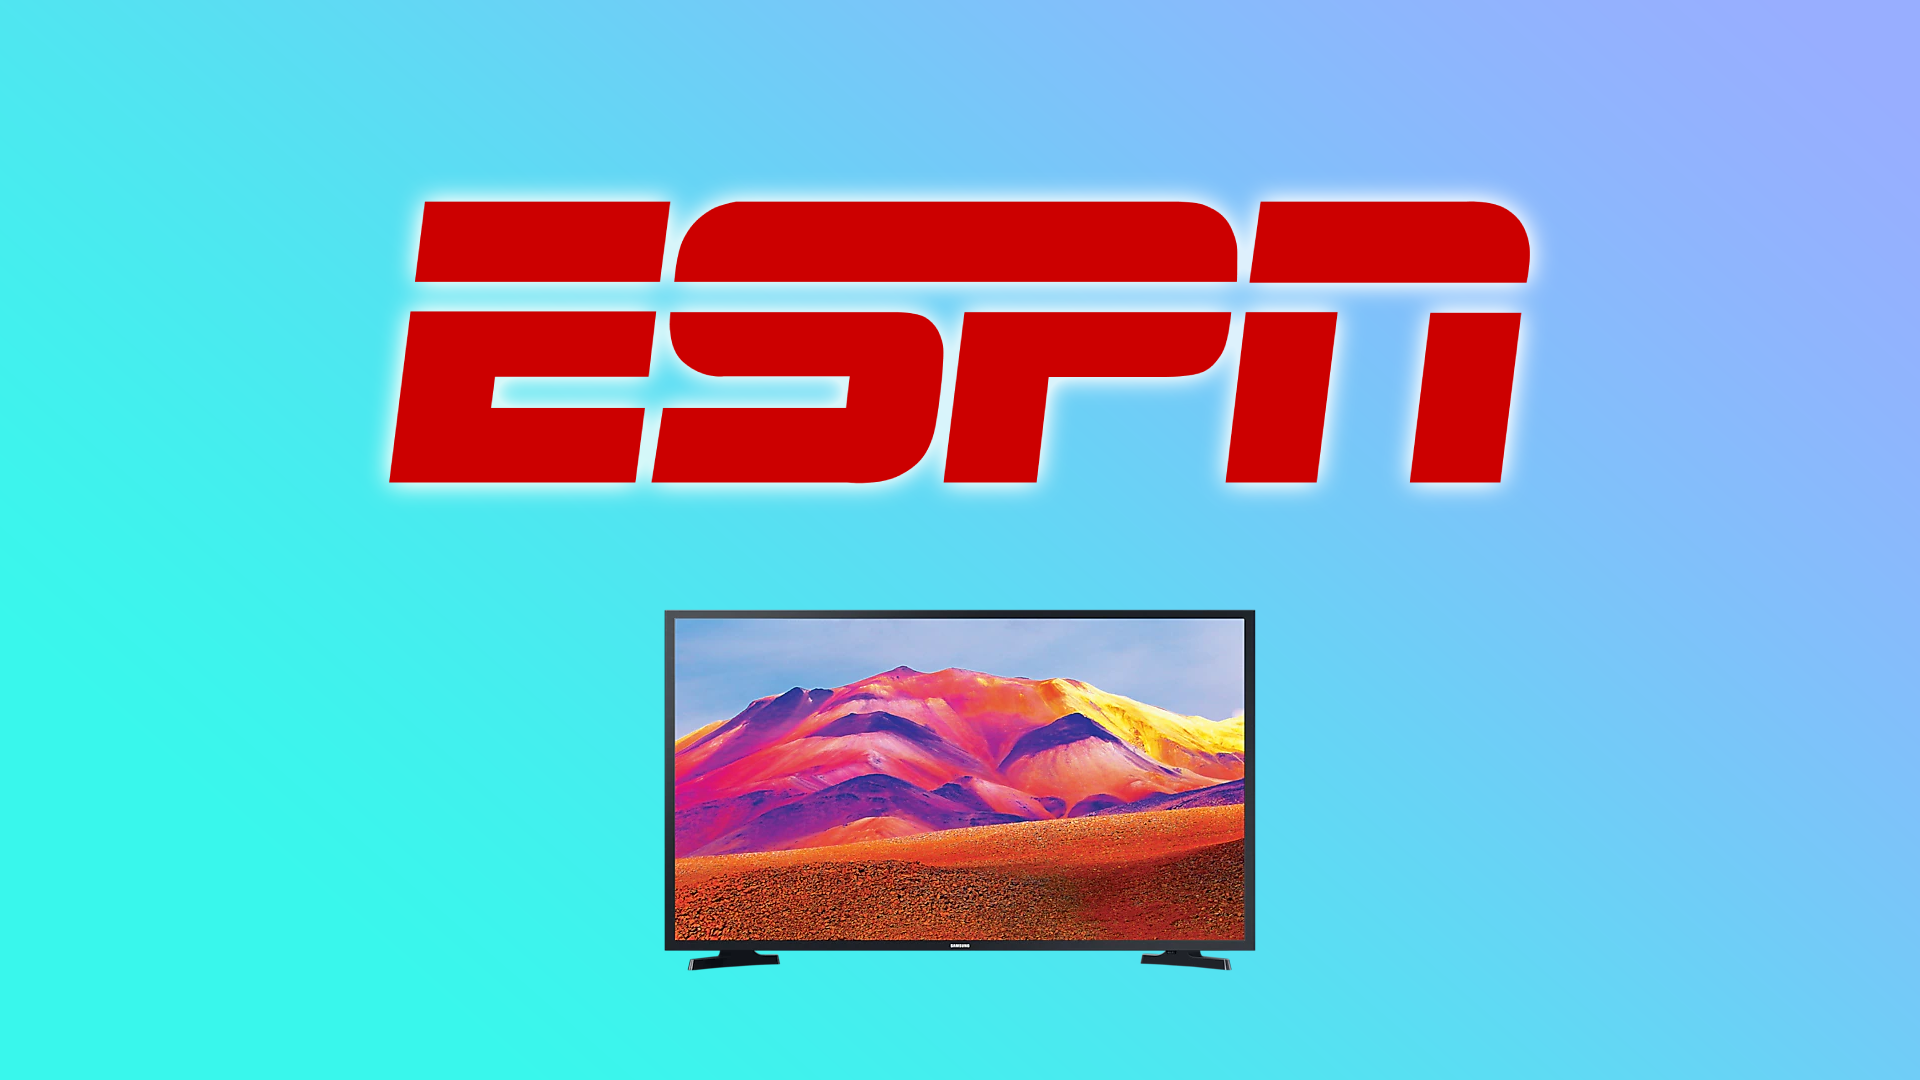 How to turn off subtitles on the ESPN app on Samsung TV